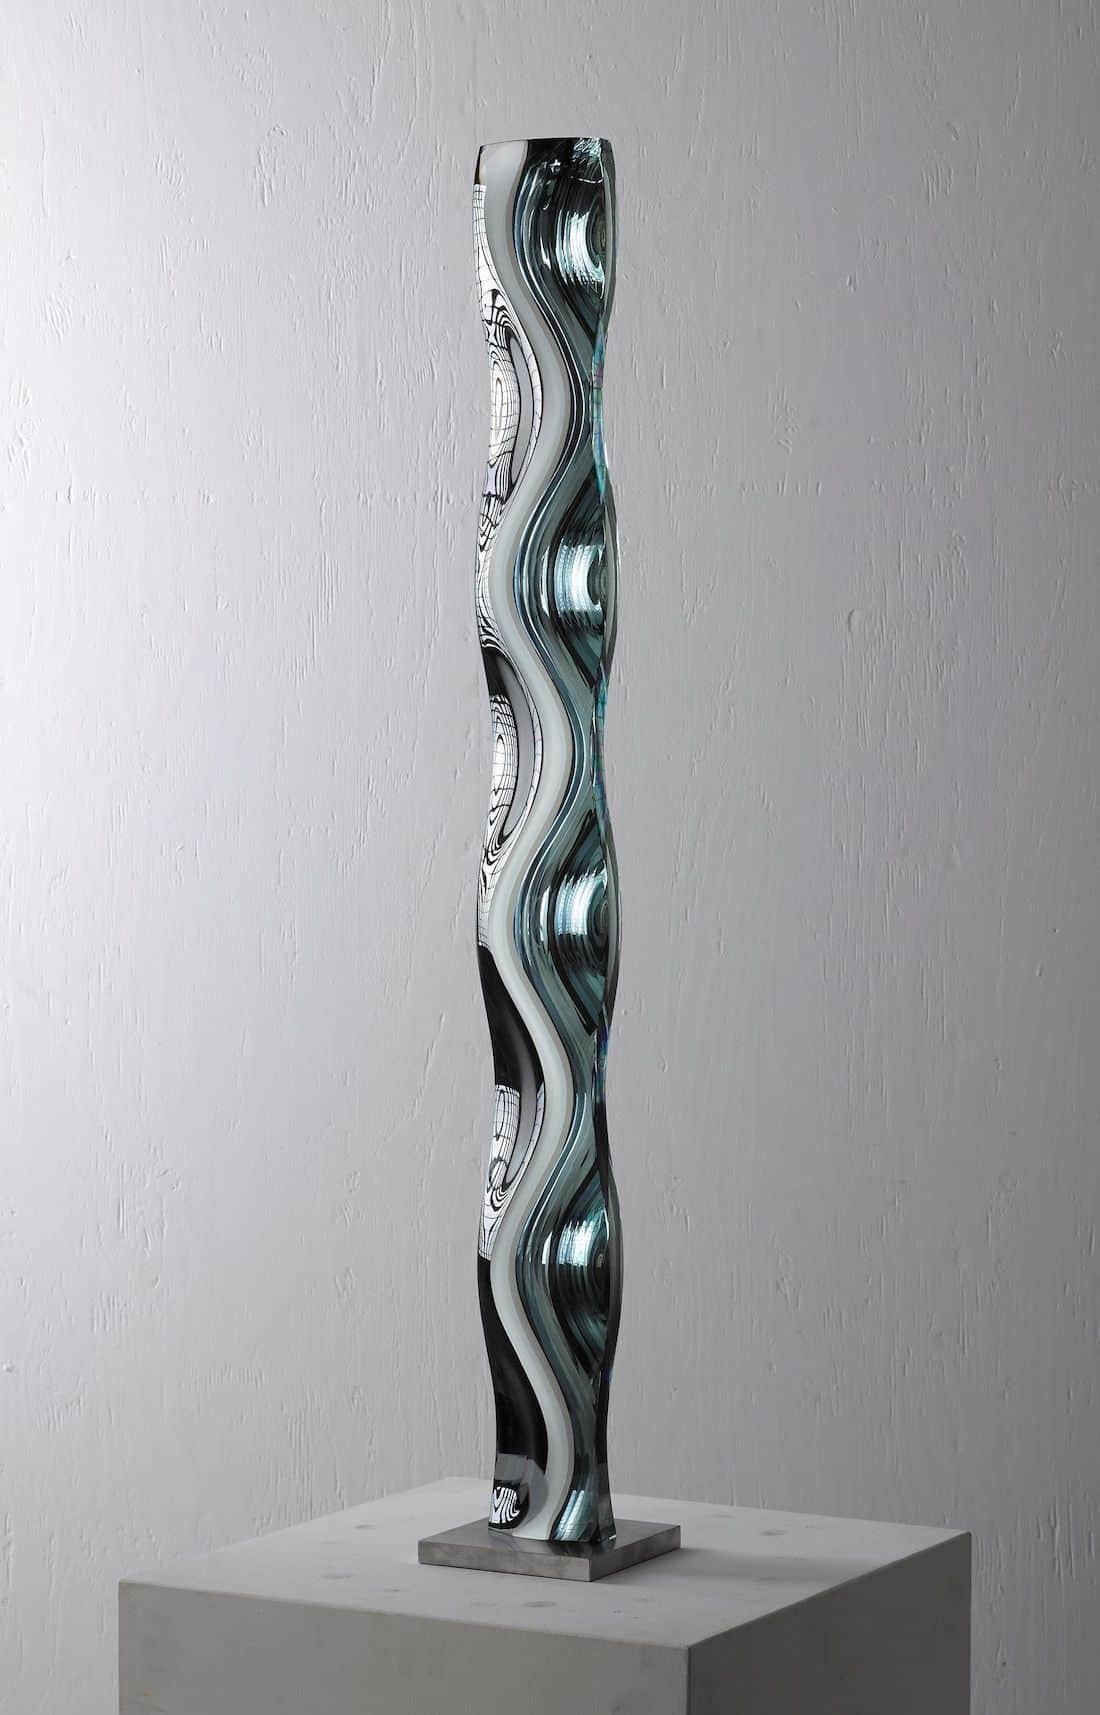 M.190402 is a glass sculpture by Japanese contemporary artist Toshio Iezumi, dimensions are 100 × 10 × 7 cm (39.4 × 3.9 × 2.8 in). 
The sculpture is signed and numbered, it is part of a limited edition of 5 editions and comes with a certificate of